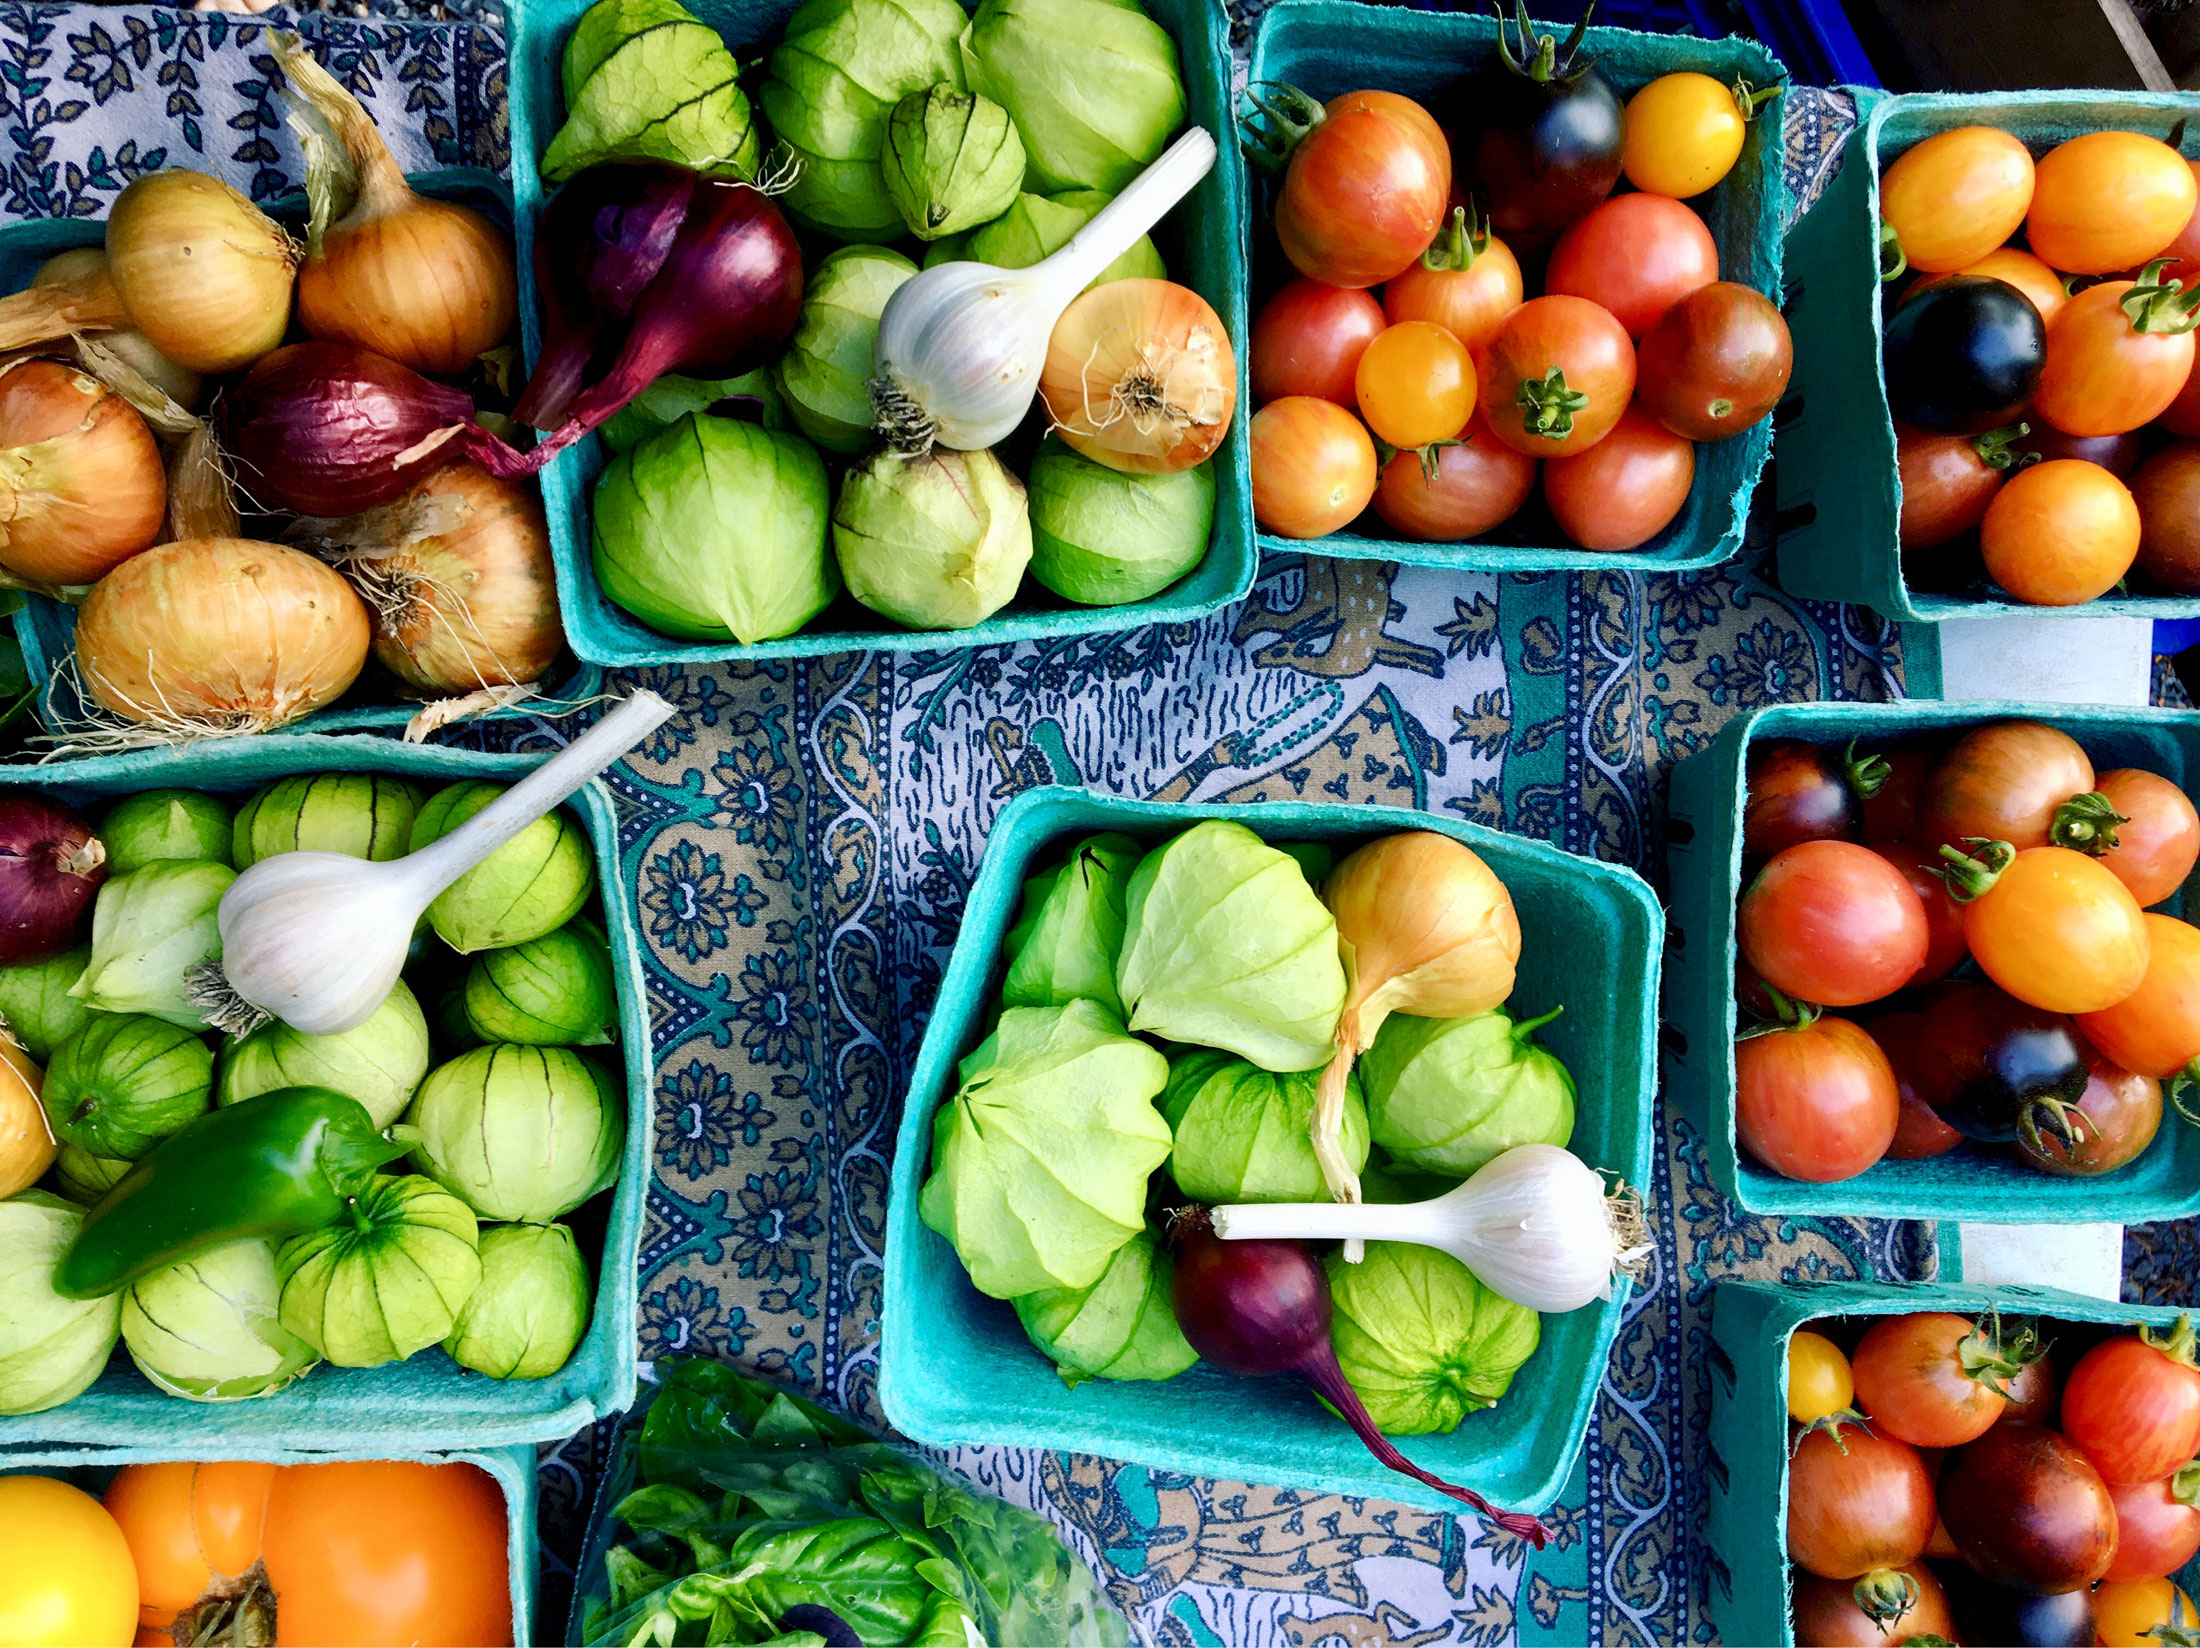 What to Know Before Heading to Farmers Market